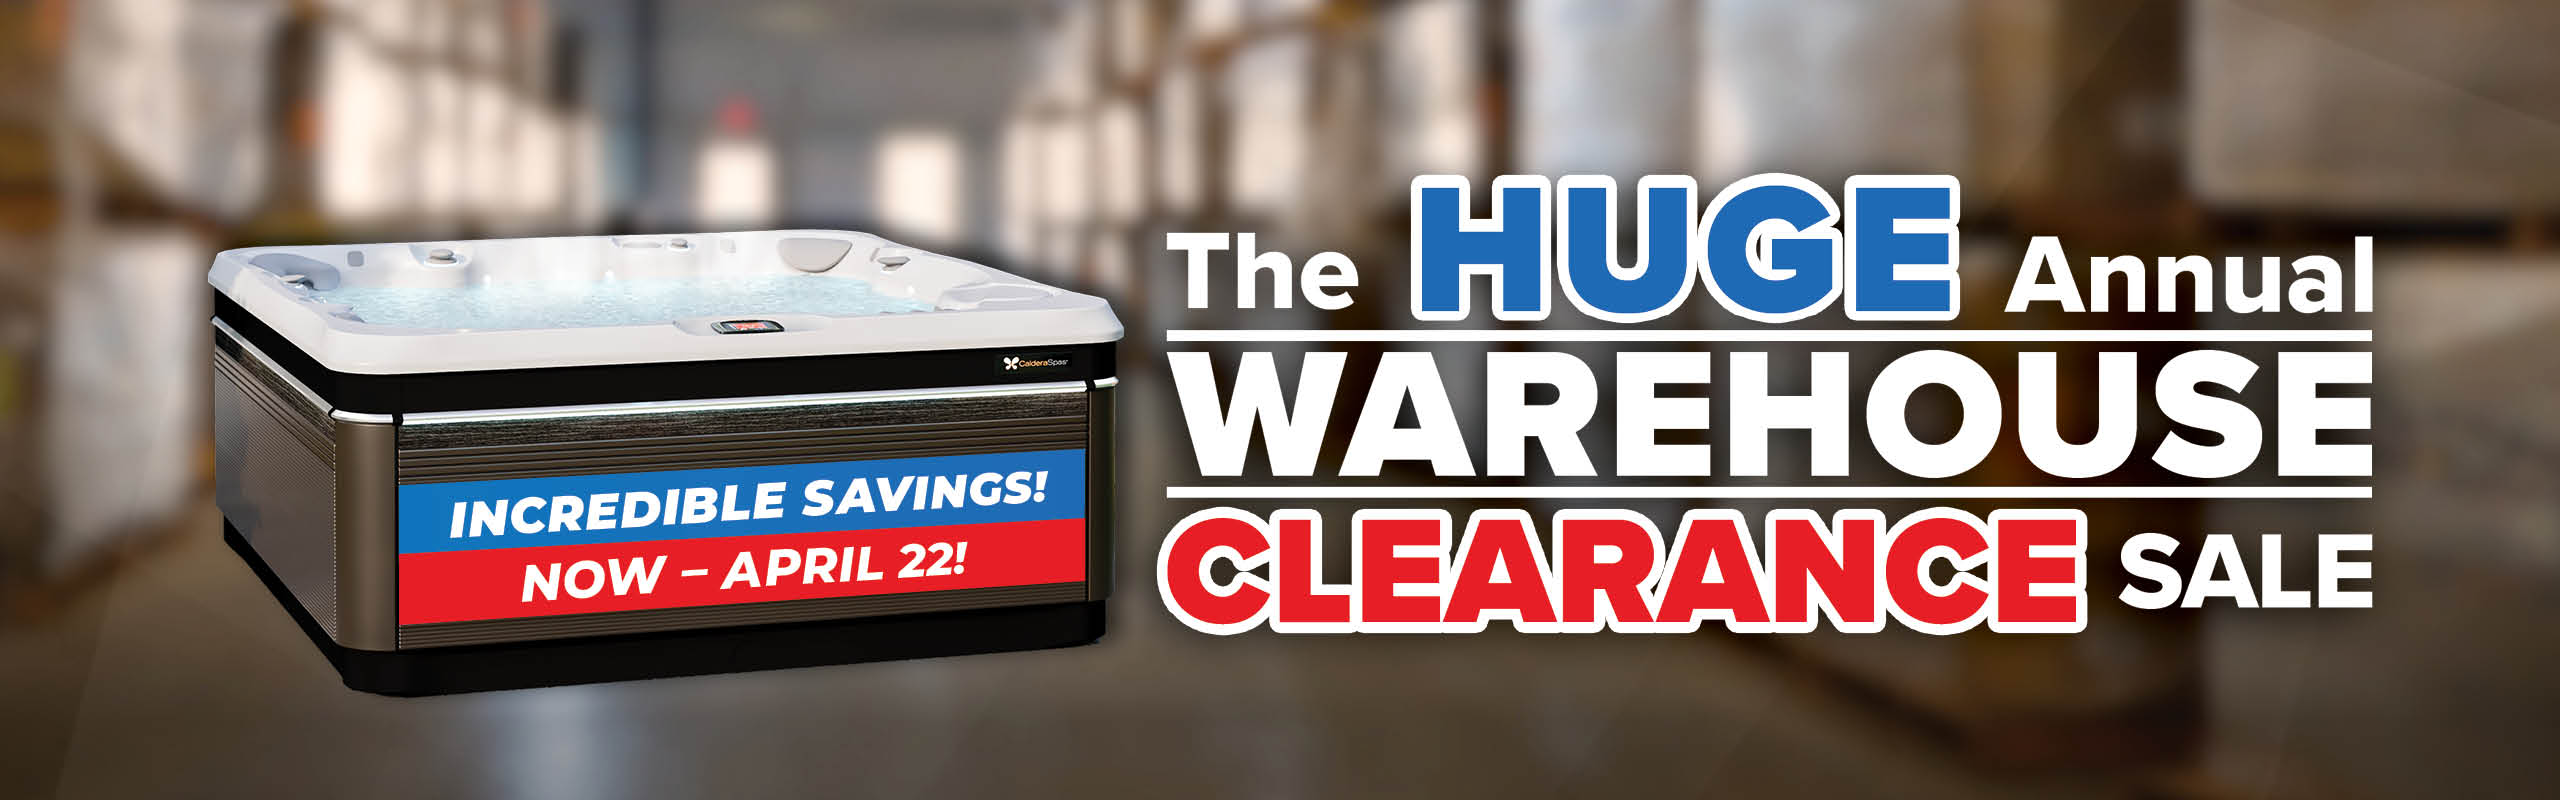 The Huge Annual Warehouse Clearance SaleSpecials